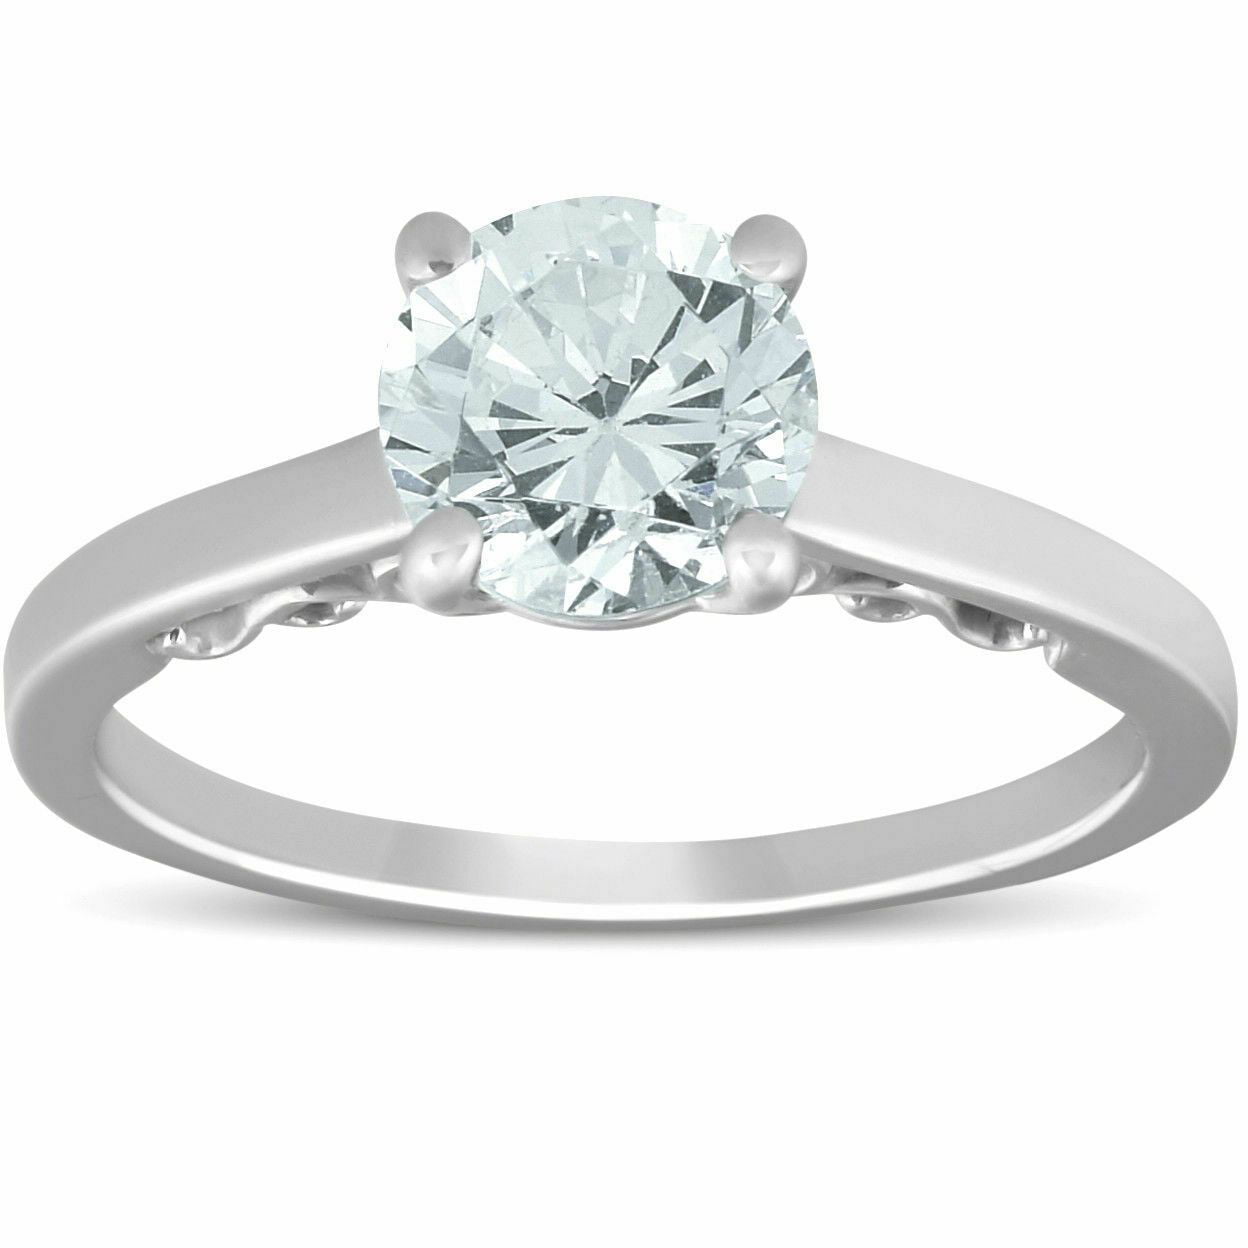 1.52ct Round Brilliant Solitaire Diamond Engagement Ring Solid 14k White Gold 